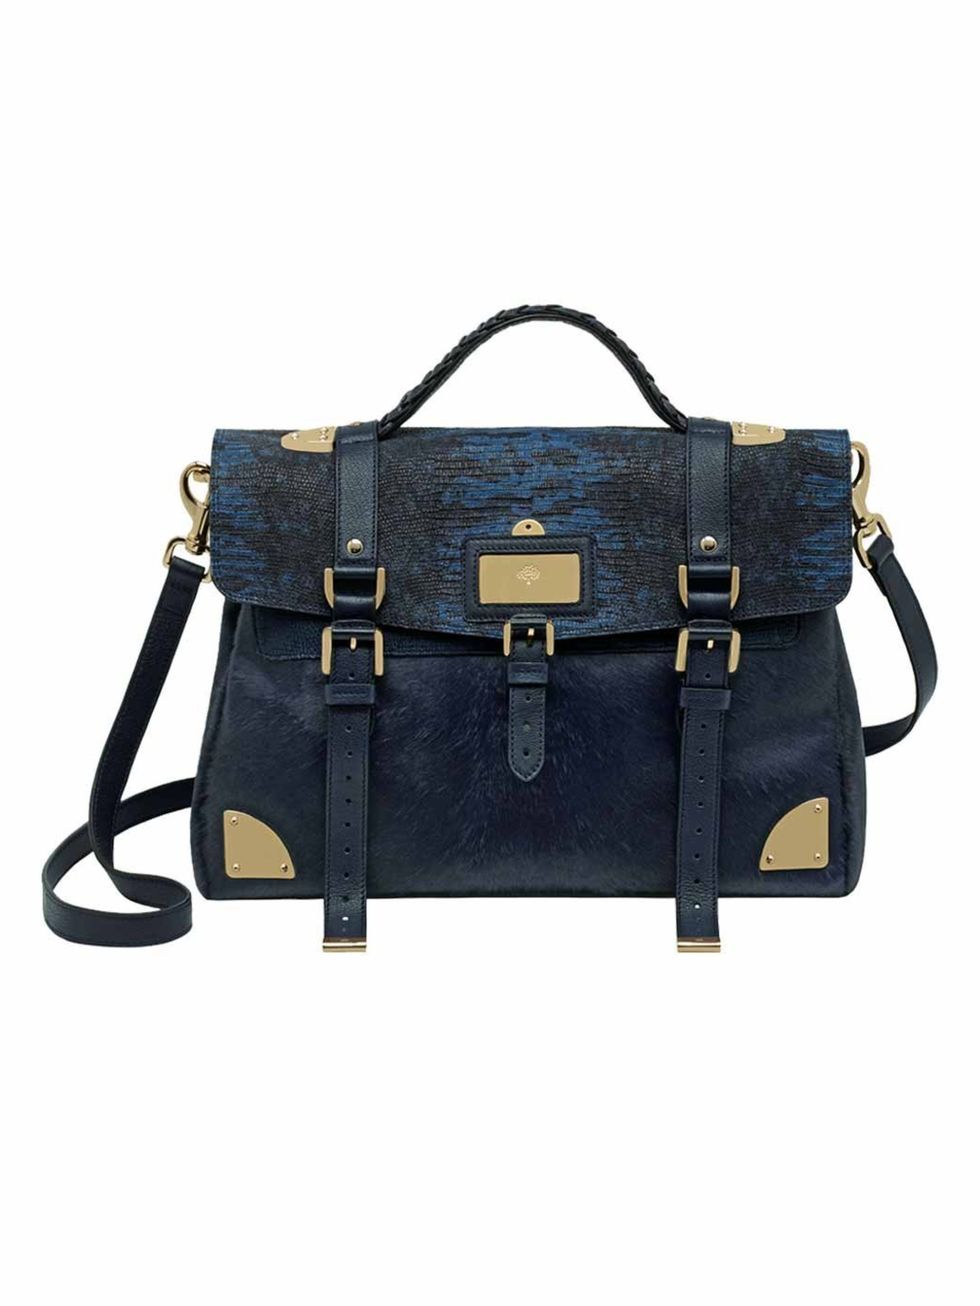 <p>Mulberry Travel bag in nightshade blue.</p>